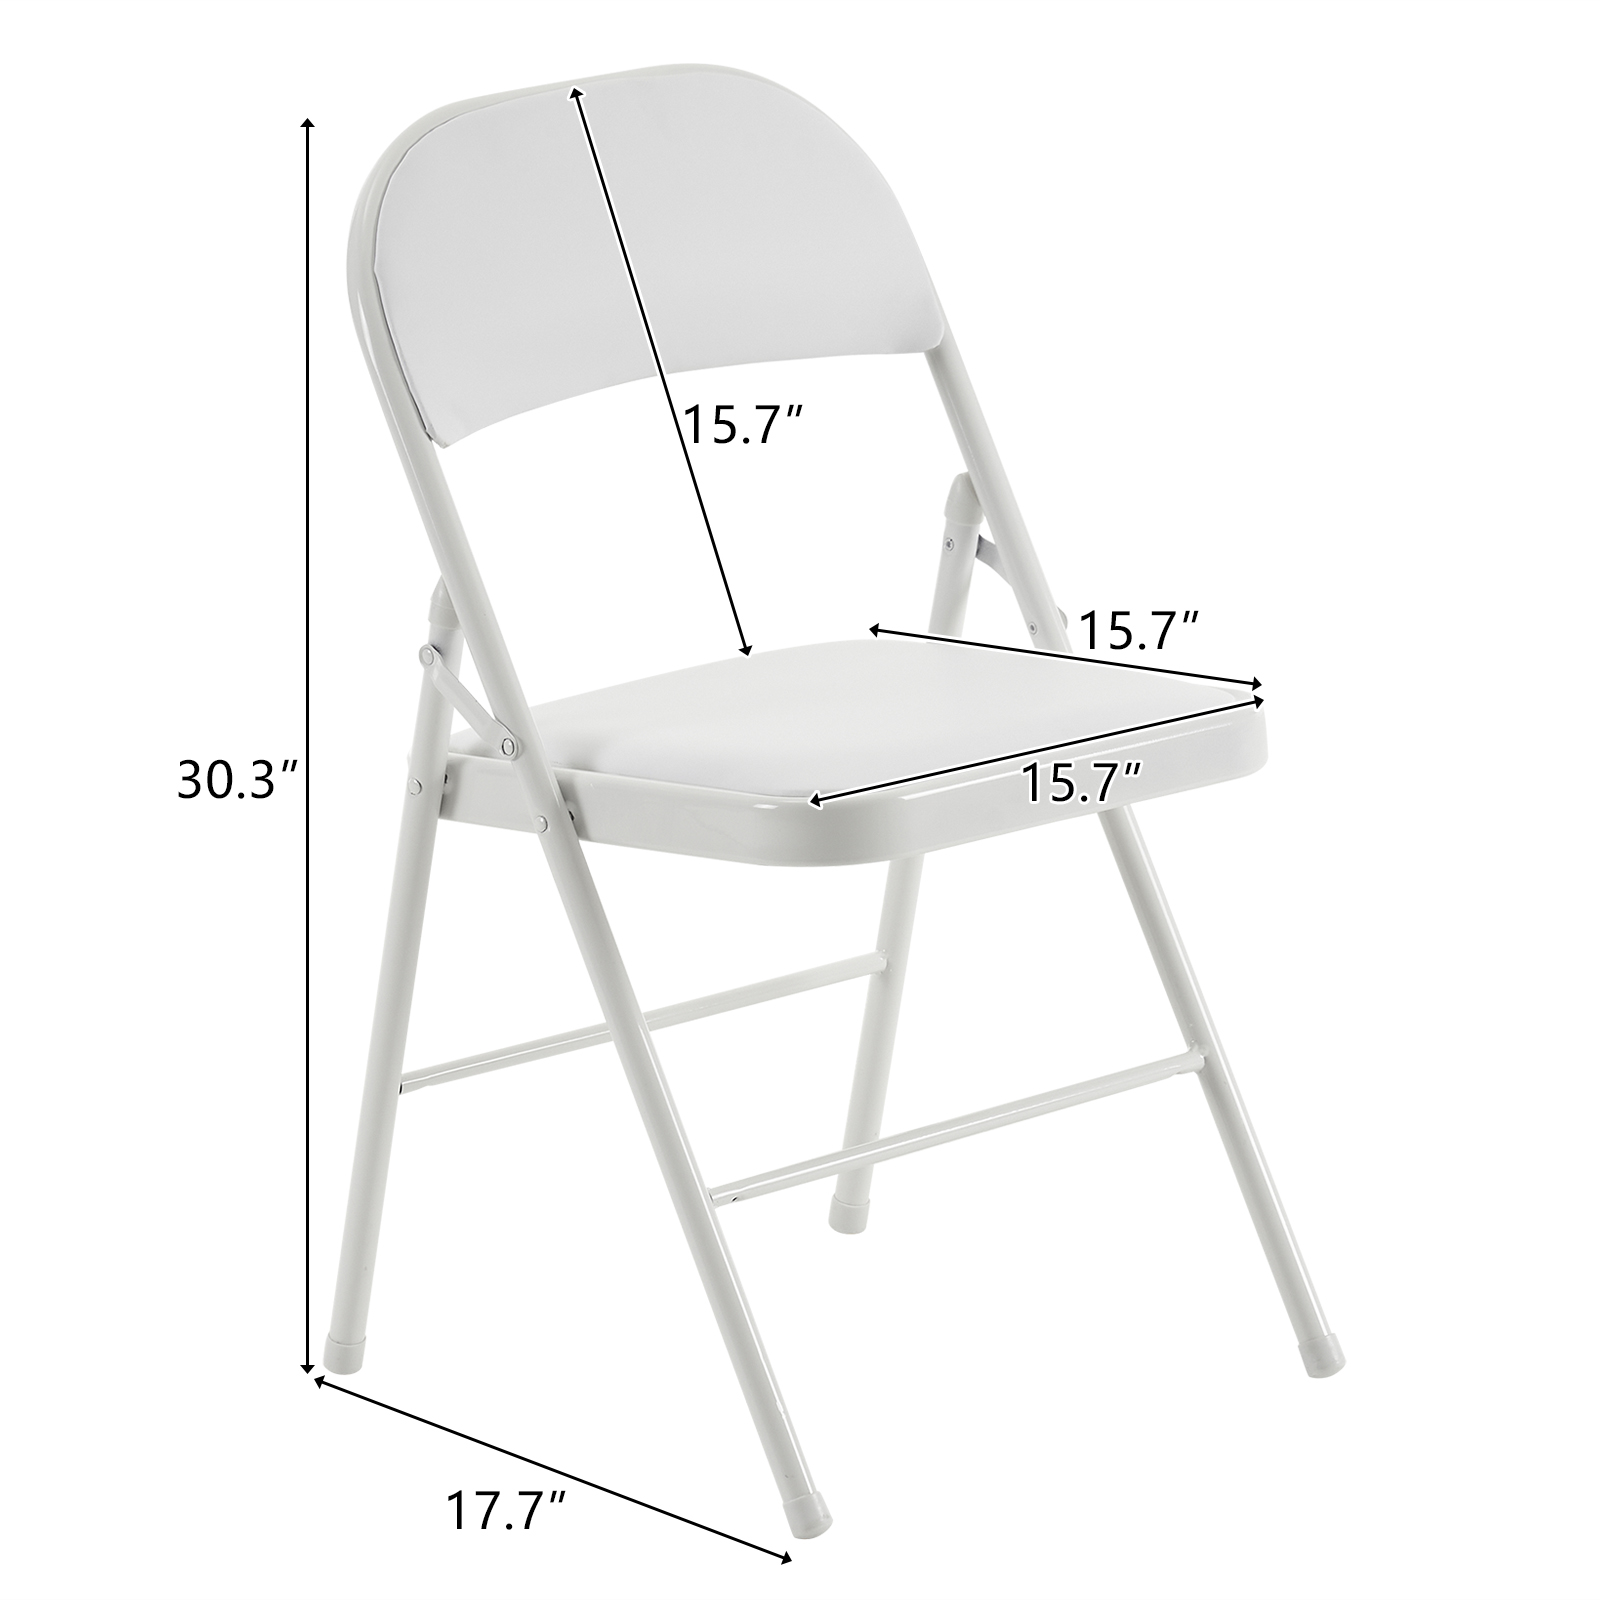 UBesGoo Set of 12 Padded Folding Chair Portable Dining Chairs Heavy Duty Party Chairs with Metal Frame White - image 3 of 10